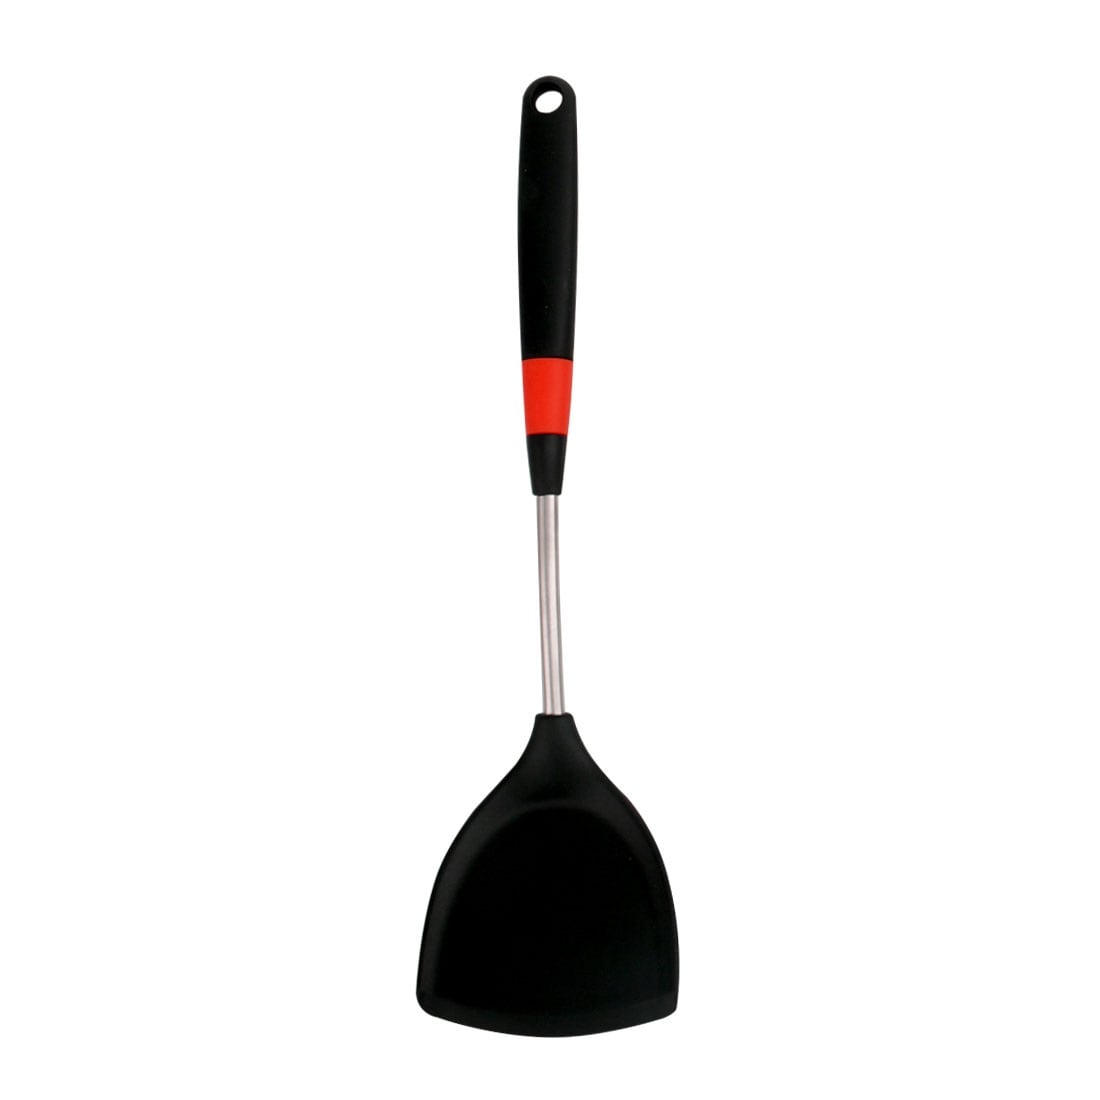 https://ak1.ostkcdn.com/images/products/is/images/direct/47c8040561e554e48f56508de7a5e78afb5cf1f2/Silicone-Turner-Heat-Resistant-Non-stick-Cookware-Spatula-Cooking.jpg